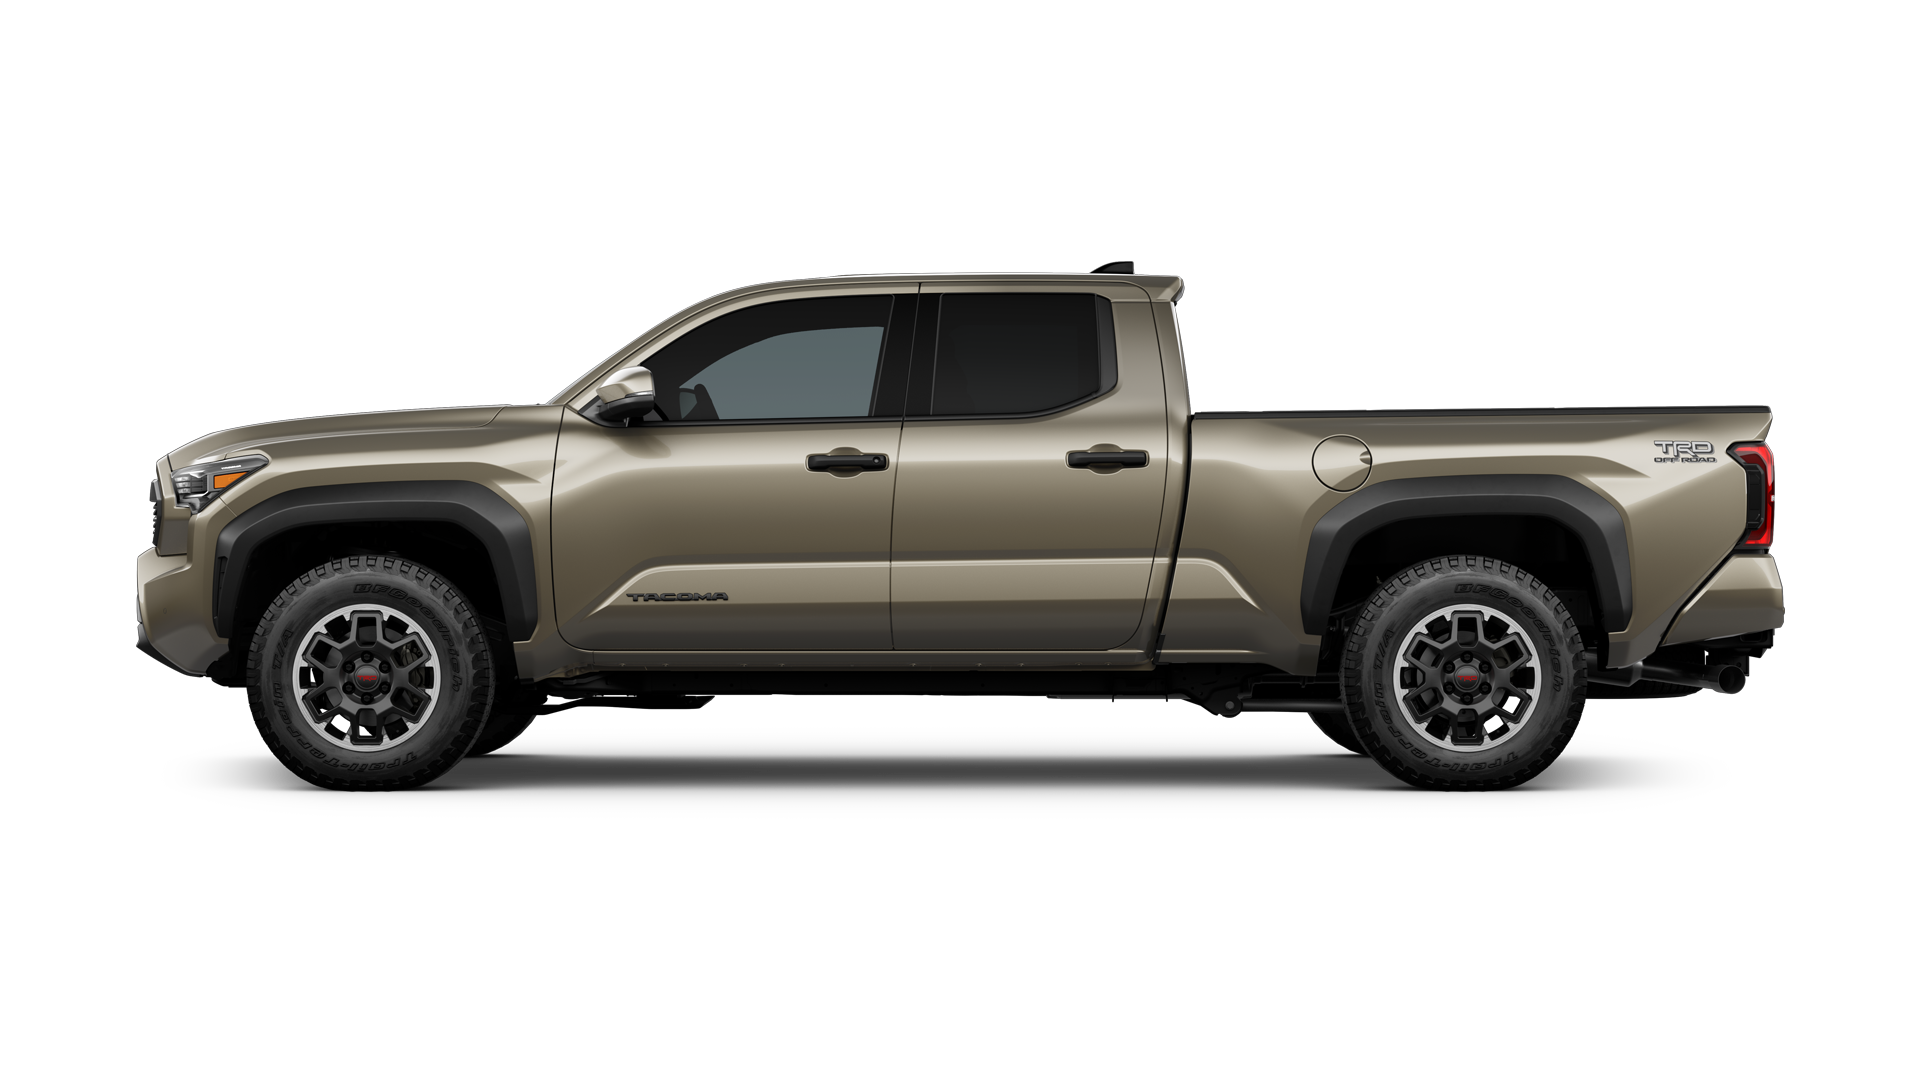 2024 Toyota Tacoma in Bronze Oxide.